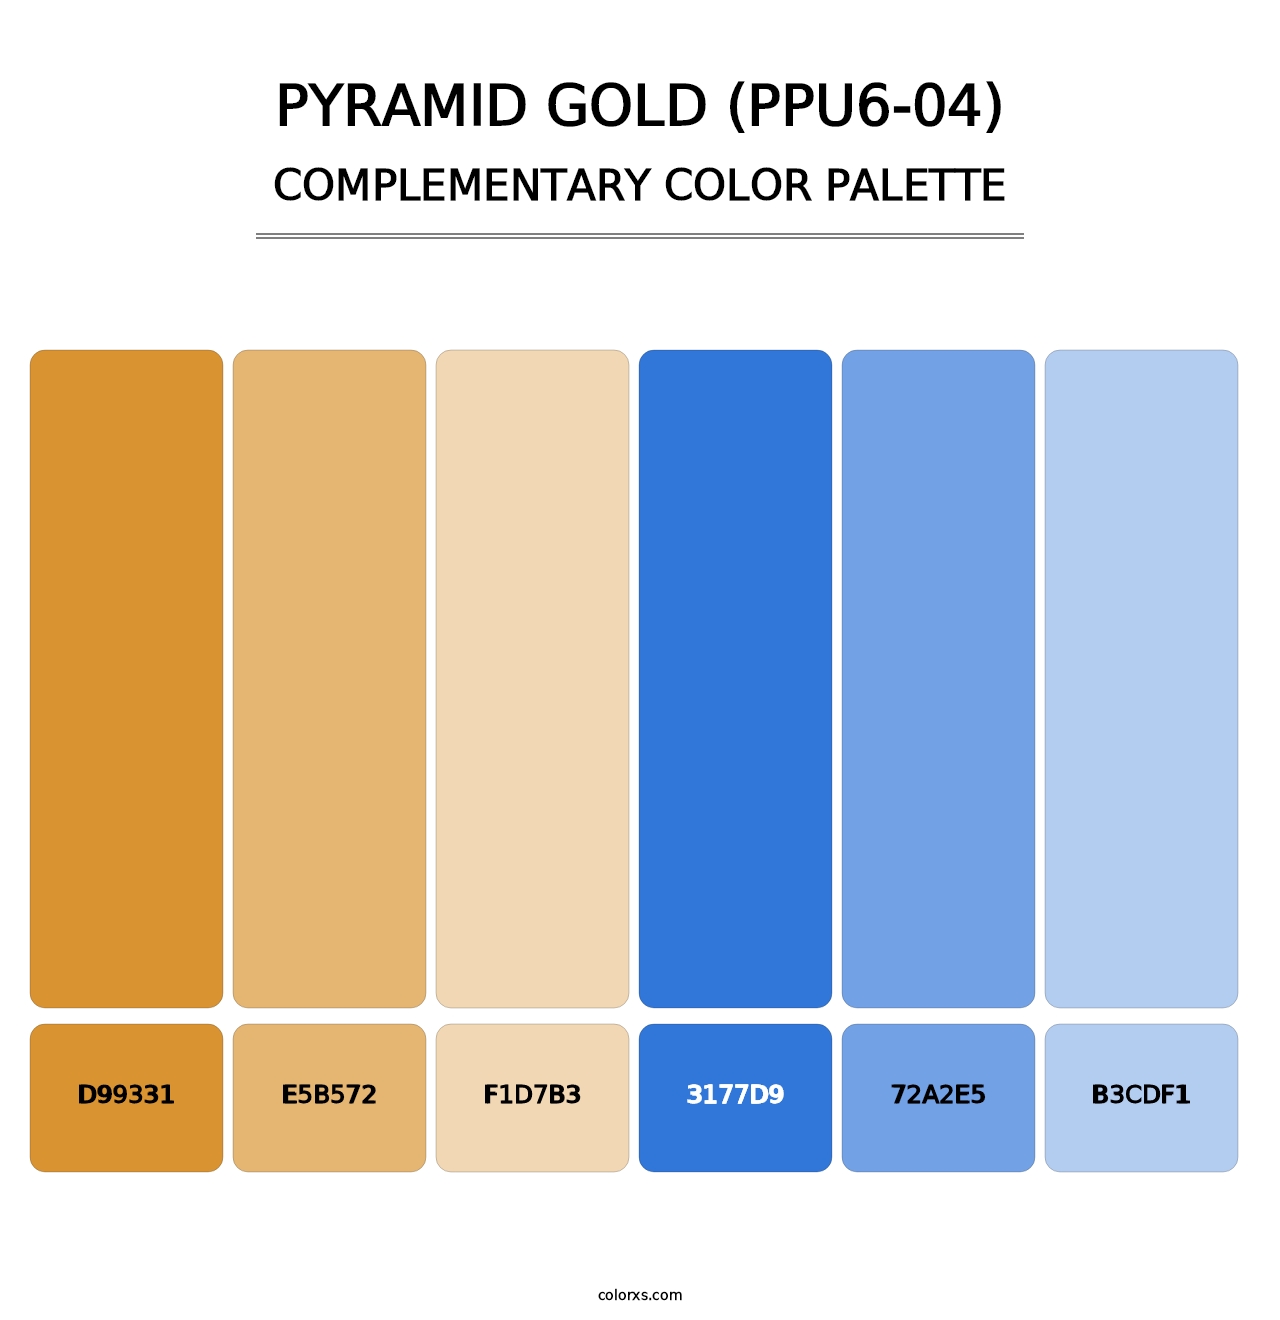 Pyramid Gold (PPU6-04) - Complementary Color Palette